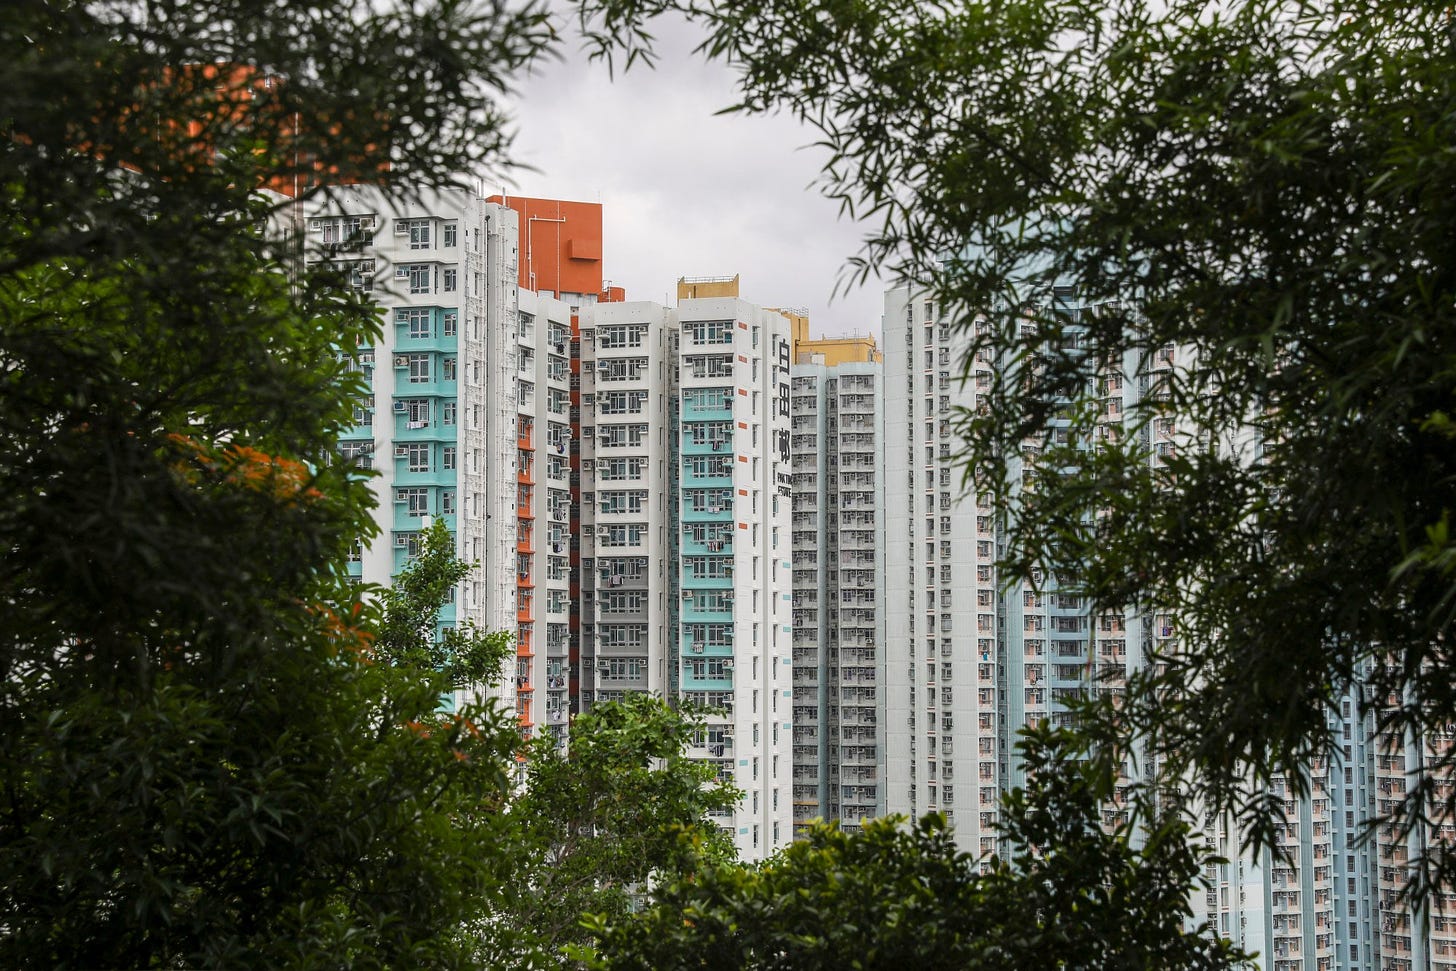 The head of the Urban Renewal Authority has said it is financially “unfeasible” for the body to assist in developing public housing. Photo: Yik Yeung-man